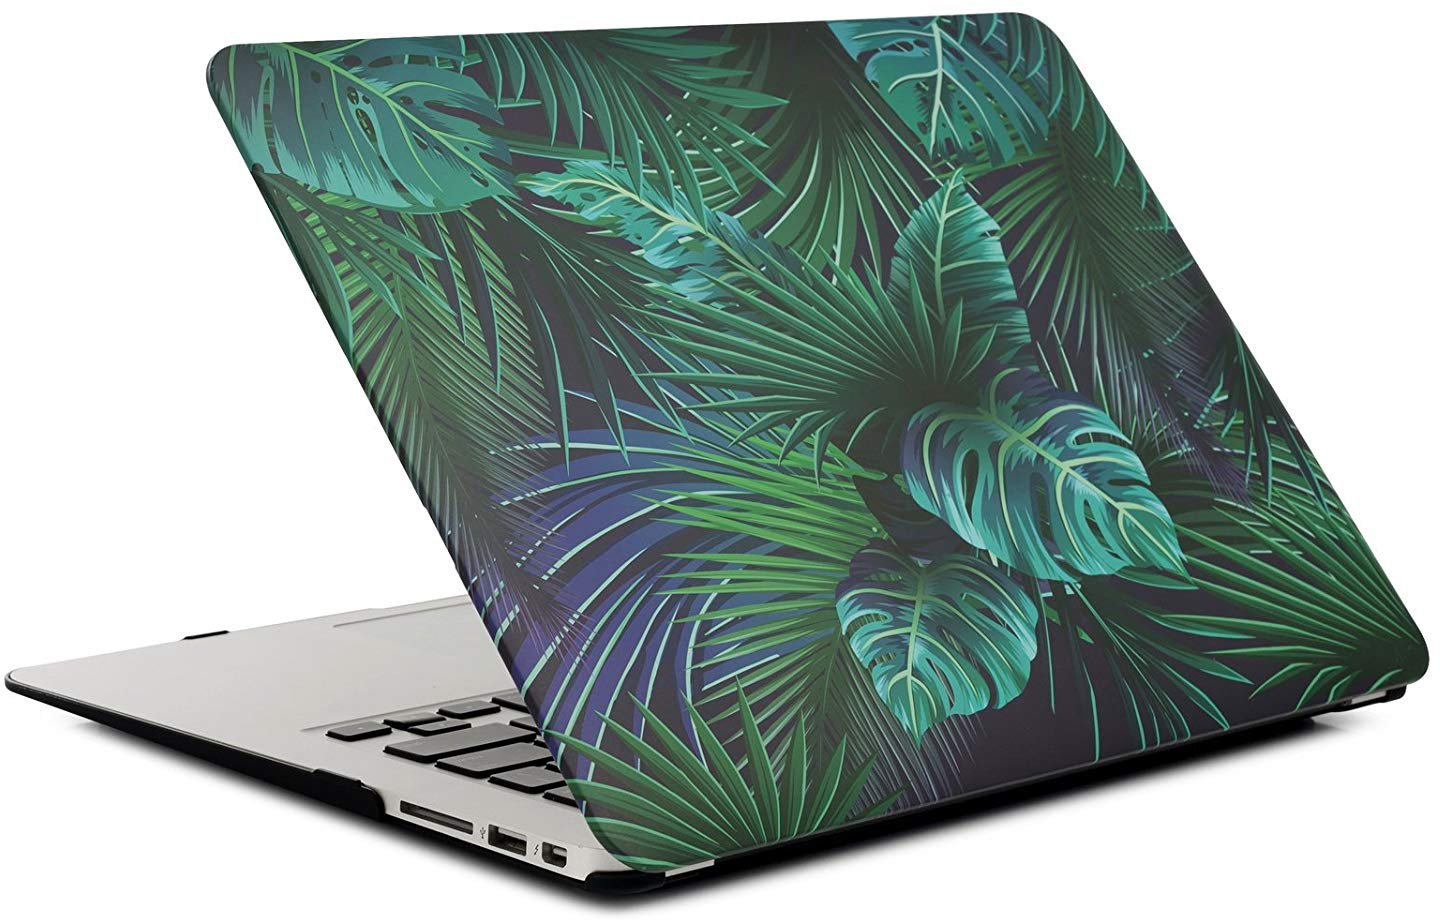 Macbook pro with retina display 15 inch sleeve don t you like